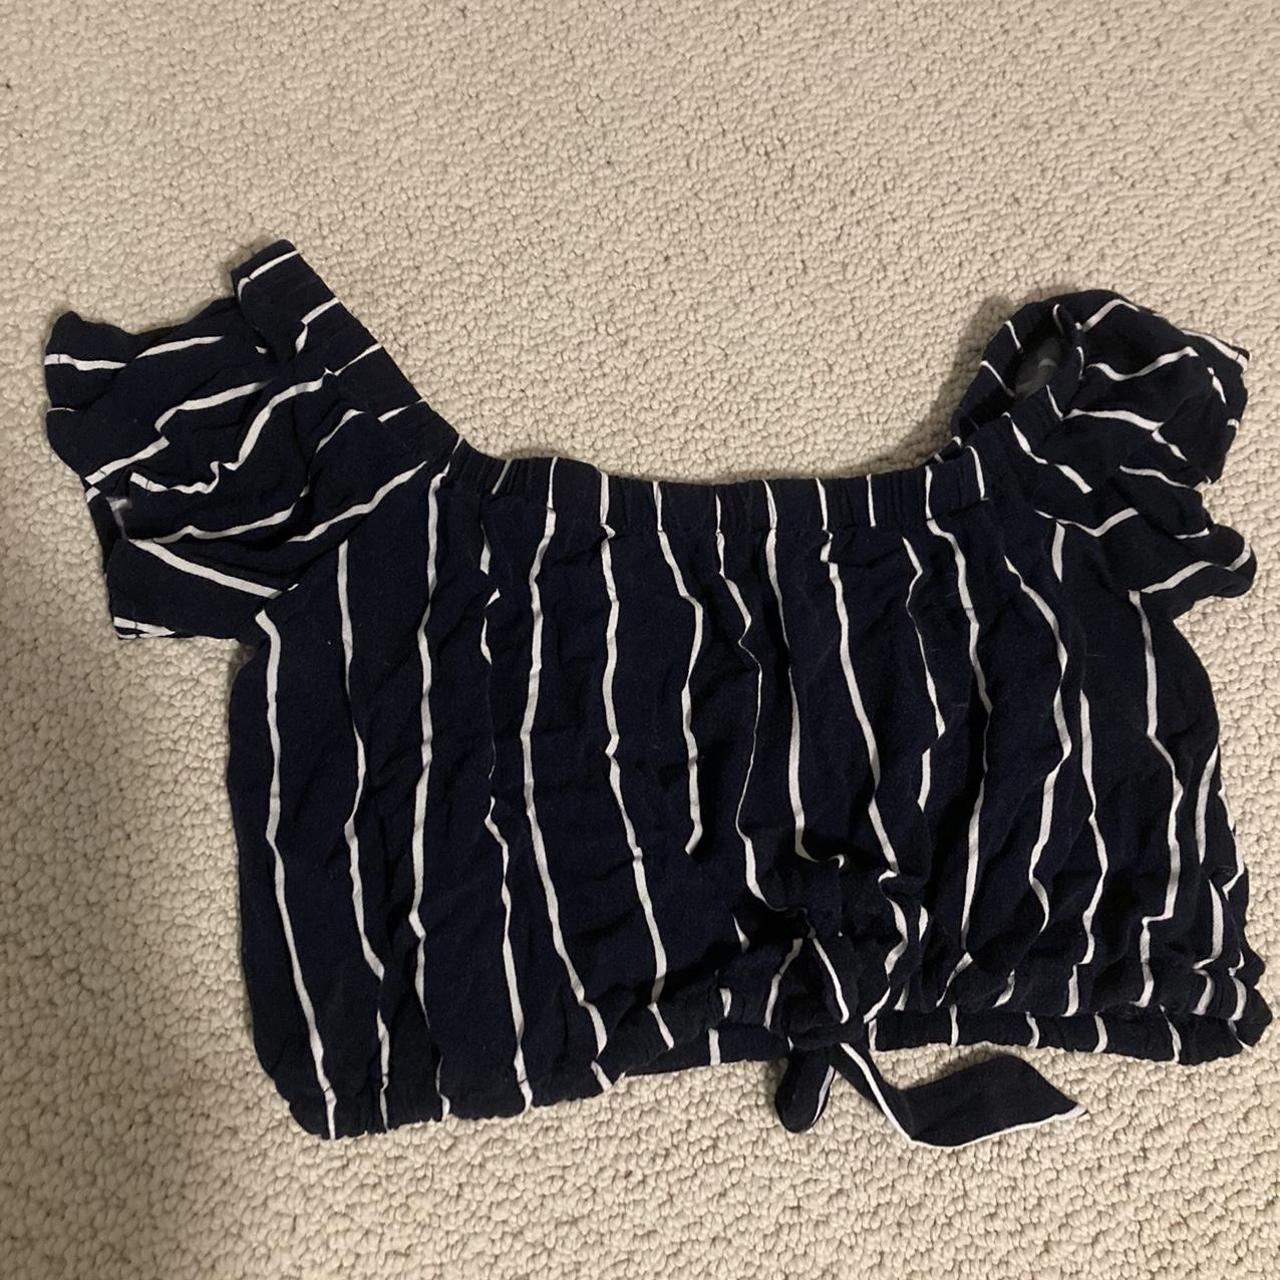 Vintage striped crop top. I love this for the... - Depop